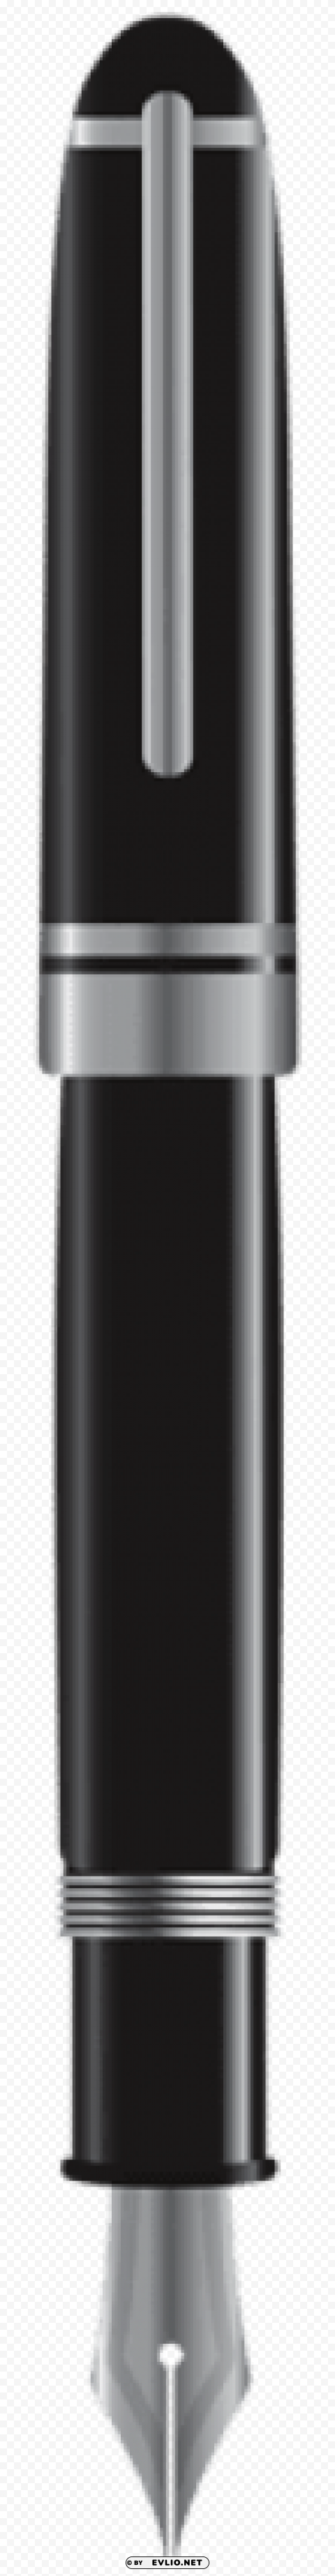 fountain pen PNG Isolated Object with Clear Transparency